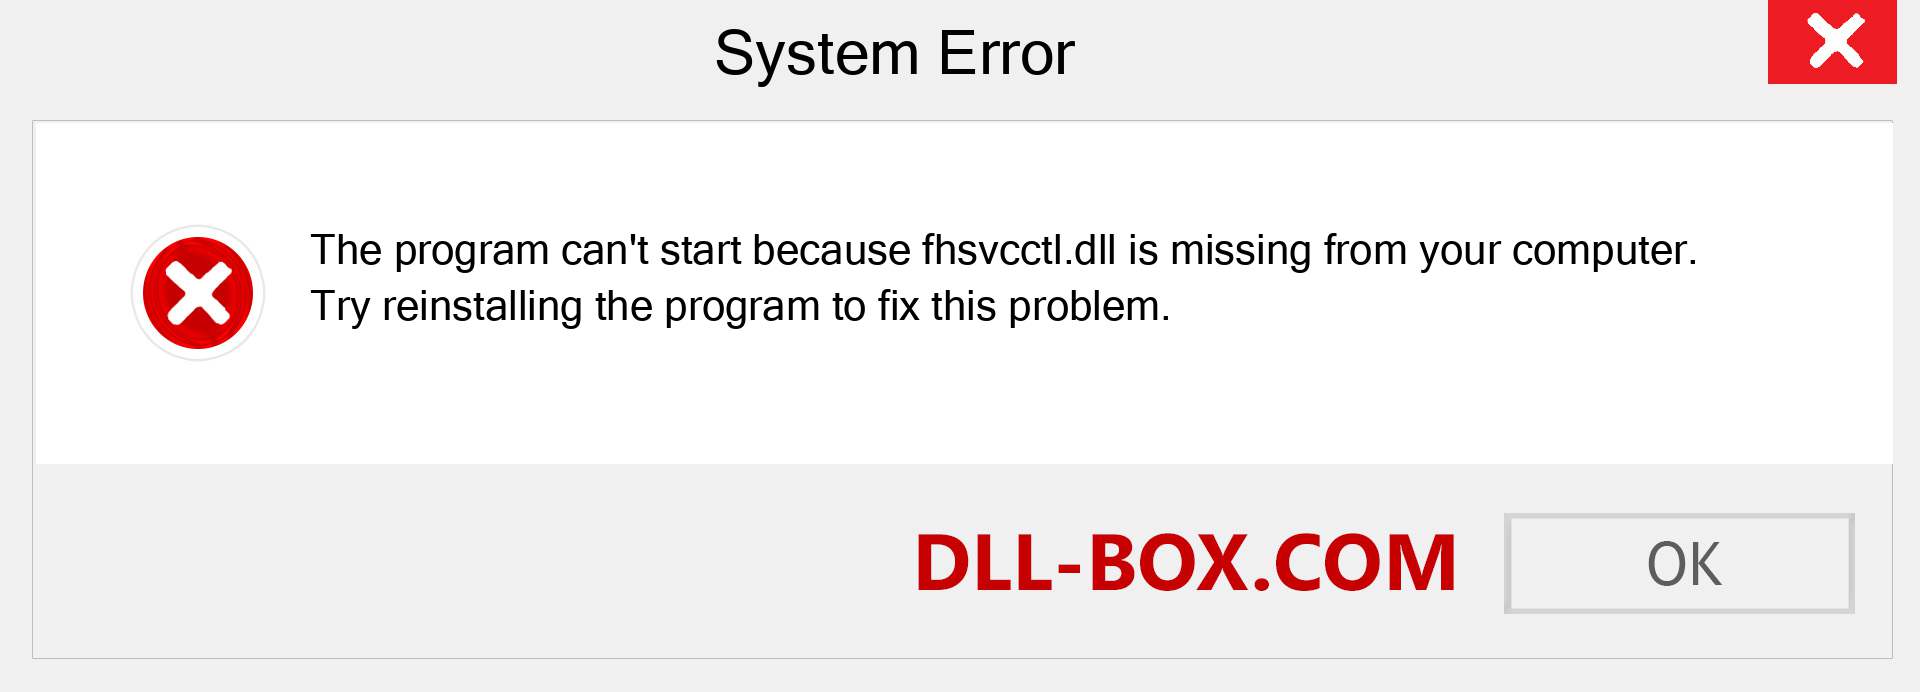  fhsvcctl.dll file is missing?. Download for Windows 7, 8, 10 - Fix  fhsvcctl dll Missing Error on Windows, photos, images